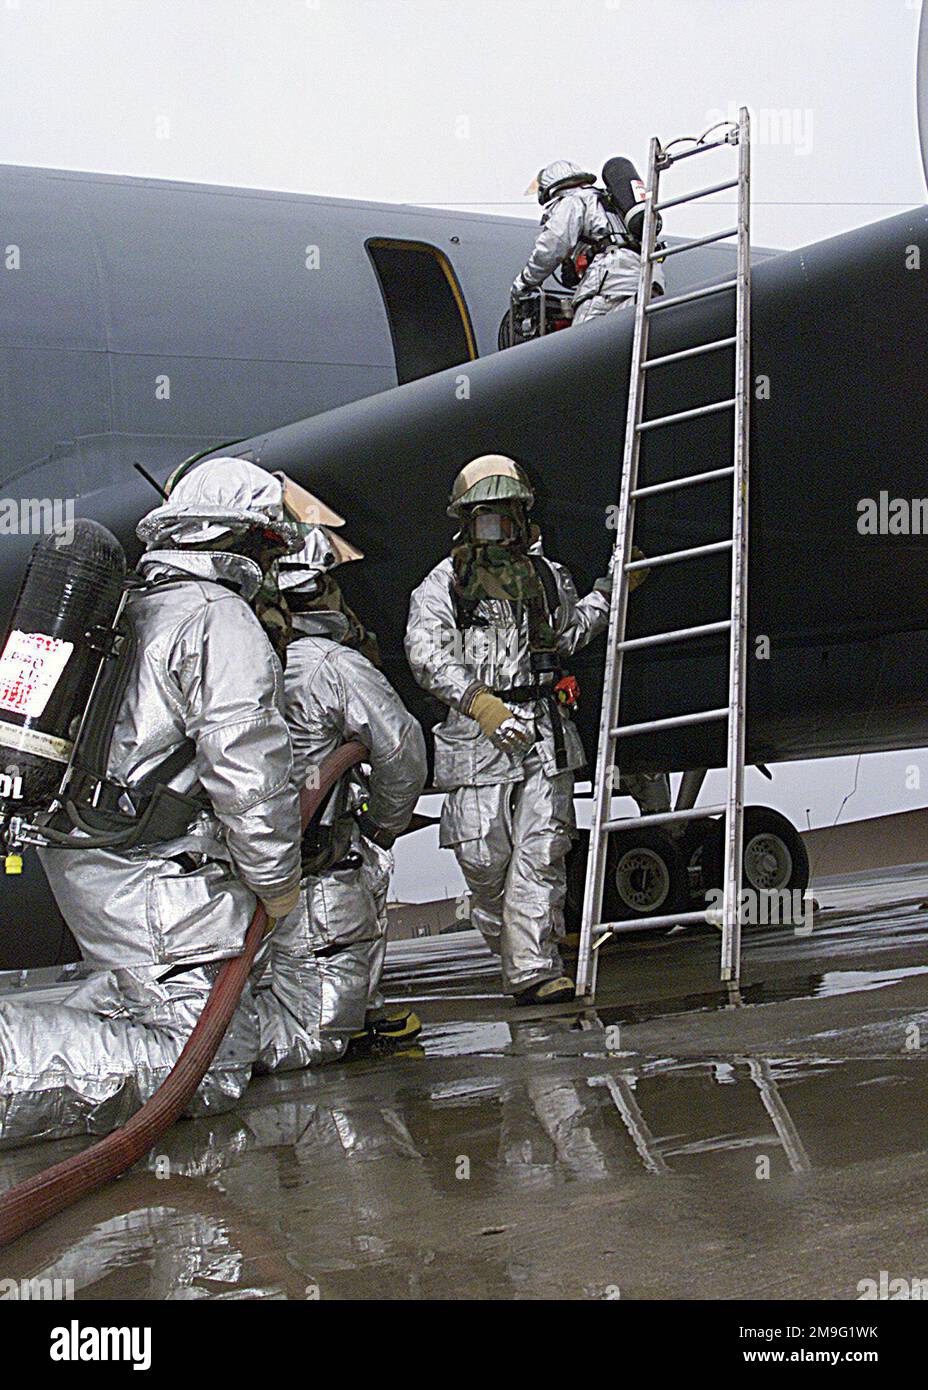 STAFF Sergeant (SSgt) Larra Erwin, SSgt Phil Wunkleman, SENIOR AIRMAN Joe Poplar, AIRMAN (AMN) Erik Waldrod, AMN Kyle Dos, of the 92nd Civil Engineering Squadron, prepare to clear out a smoke filled cockpit during Operational Readiness Inspection (ORI) EXERCISE CRISIS REACH 01-49, Fairchild Air Force Base, Washington. Members are wearing aluminized turnout gear or Crash/Fire/Rescue Suit (CFR) and Self Contained Breathing Apparatus (SCBA). Gear is used by fire fighters in high heat applications. Subject Operation/Series: CRISIS REACH 01-49 Base: Airway Heights State: Washington (WA) Country: Un Stock Photo